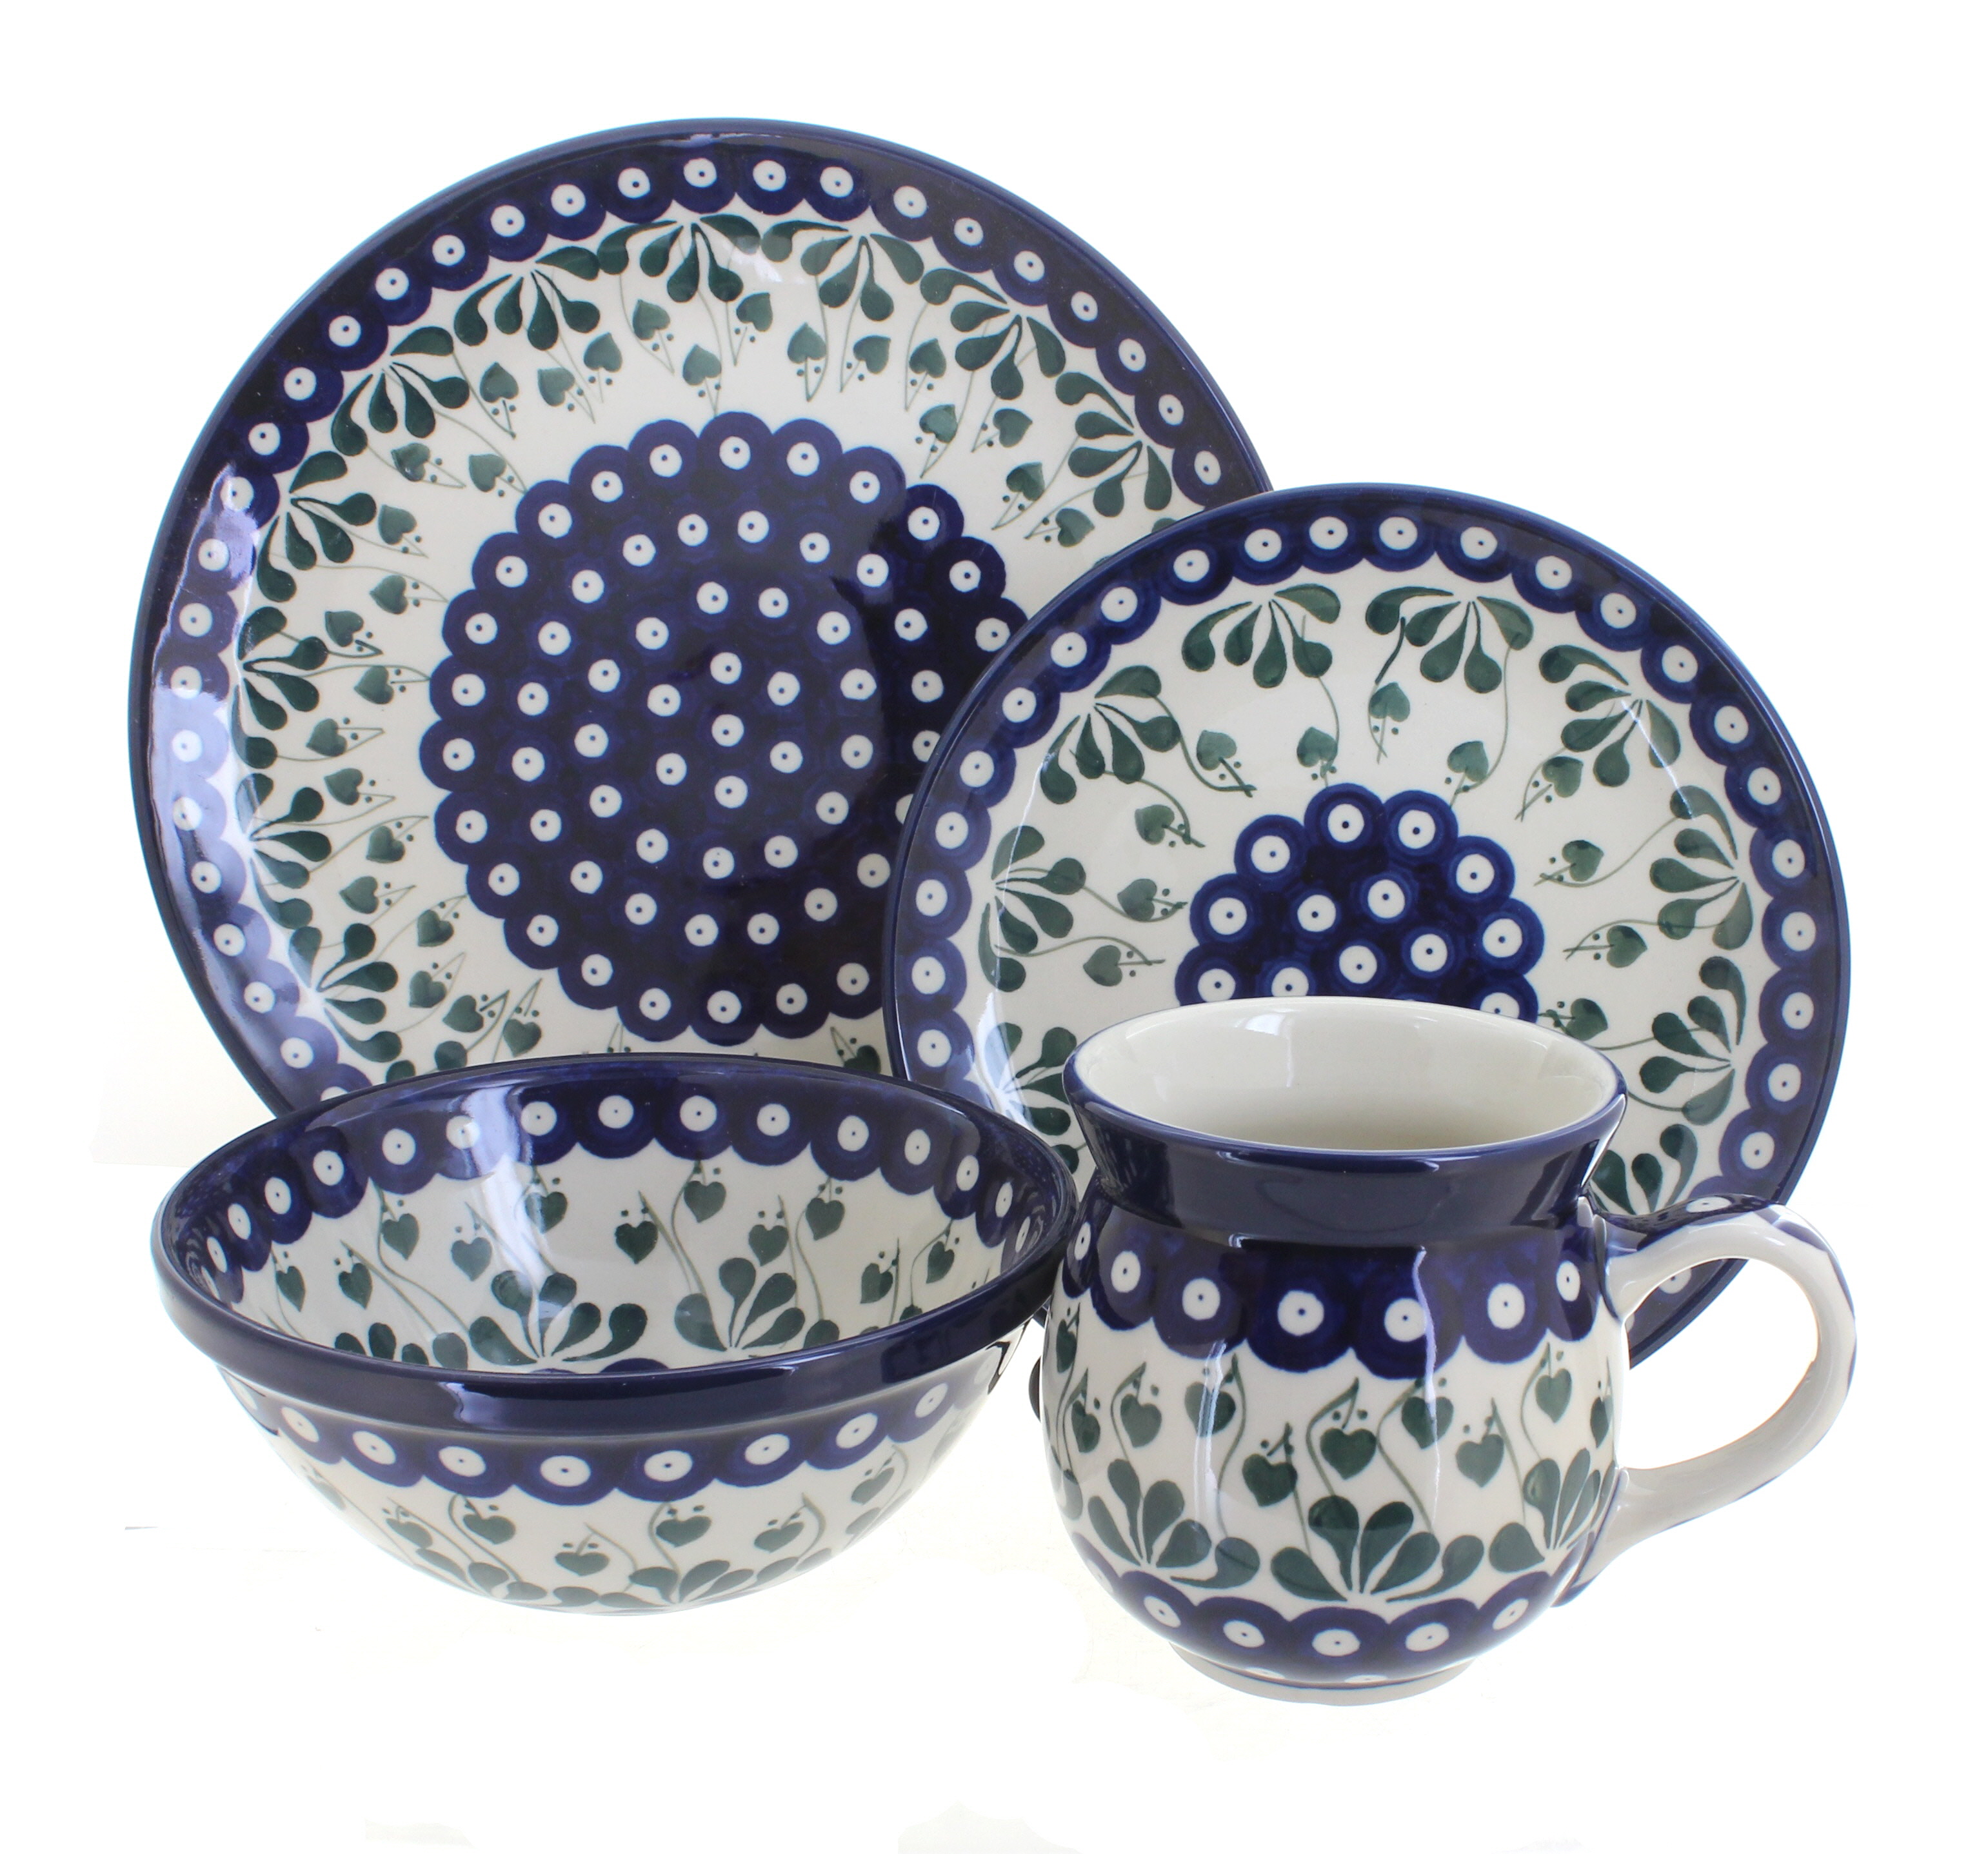 Polish Pottery Alyce 4 Piece Place Setting - Service for 1